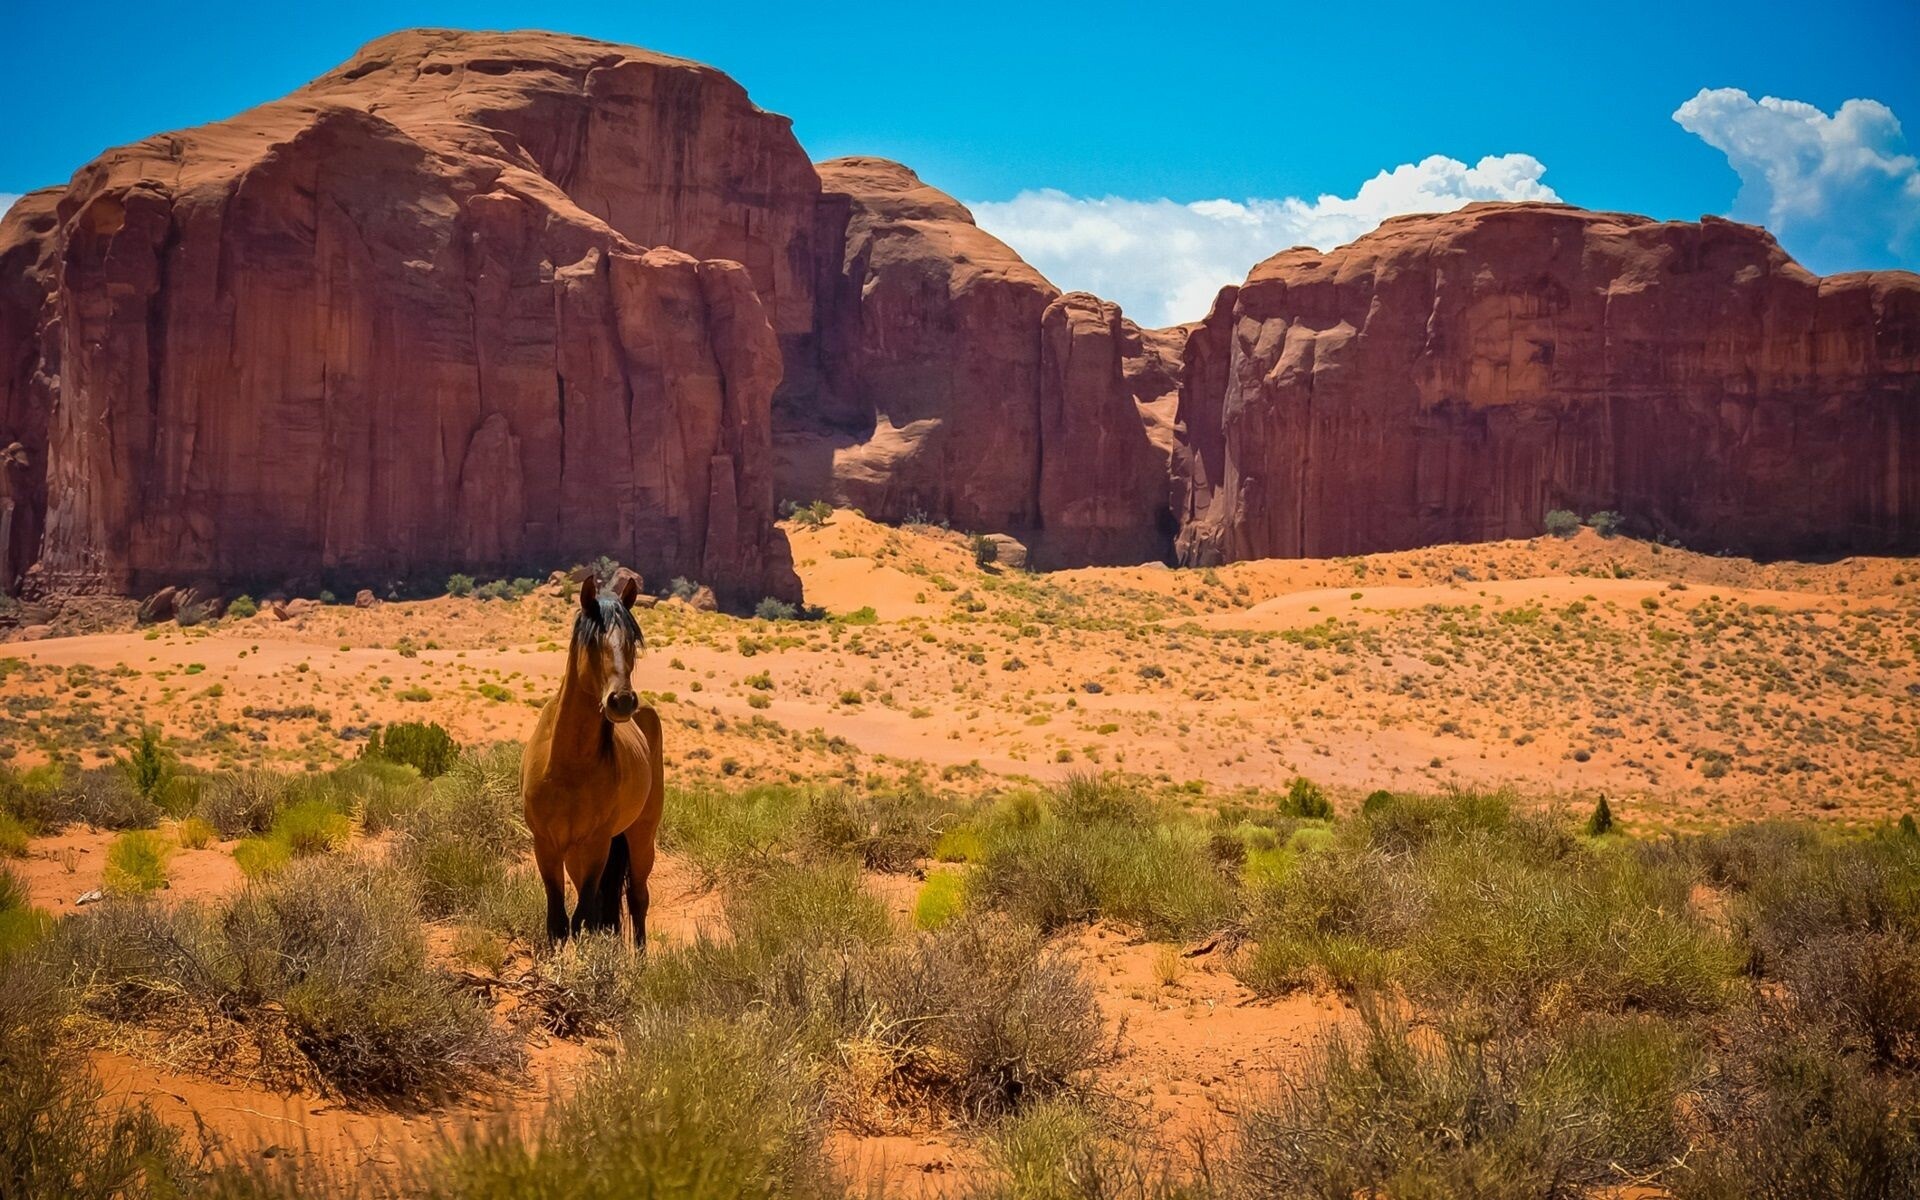 Arizona desert, PC and mobile, Free download, iPhone Android, 1920x1200 HD Desktop